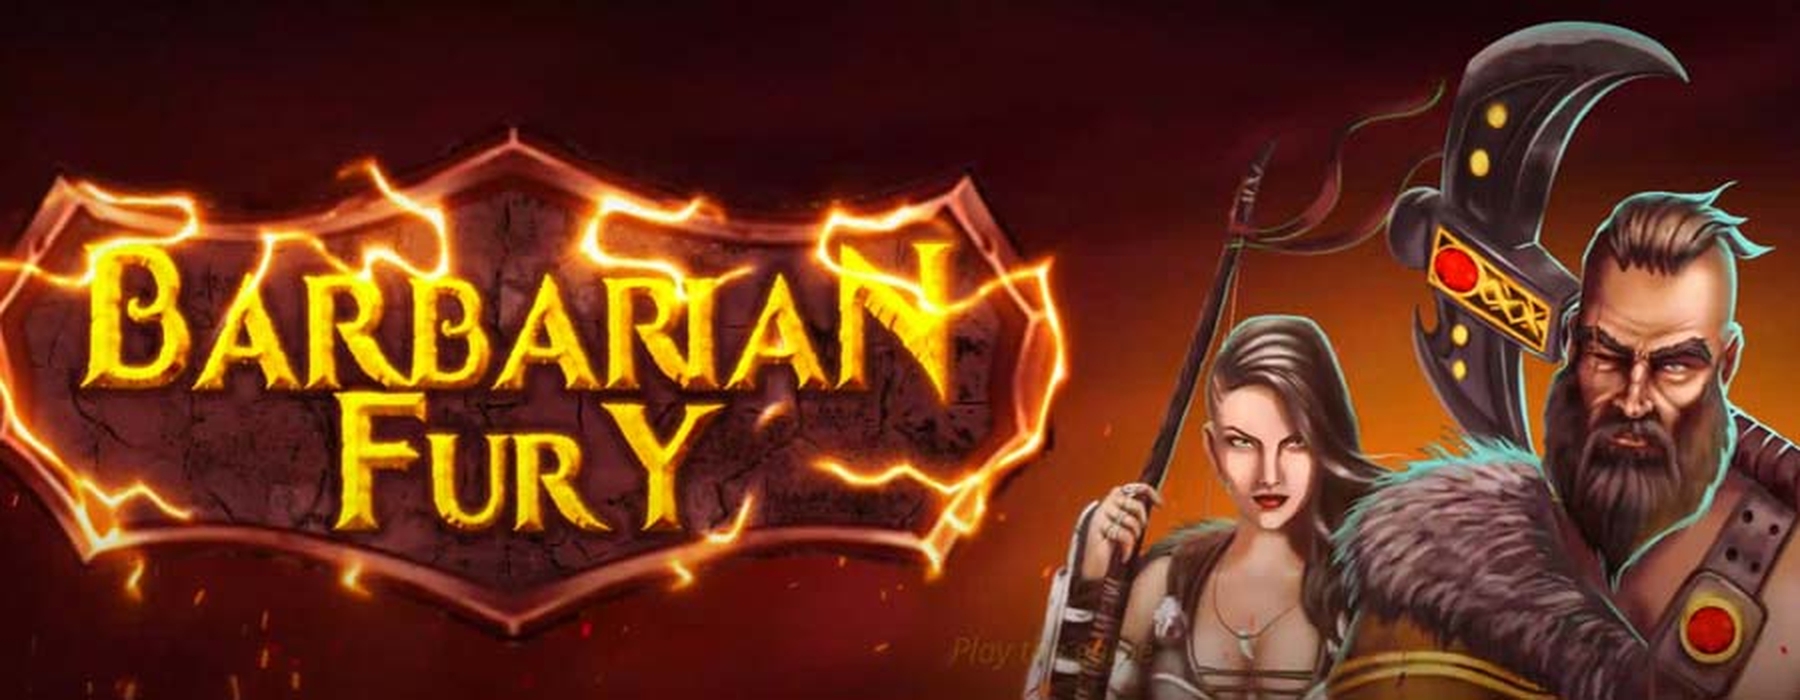 The Barbarian Fury Online Slot Demo Game by Nolimit City